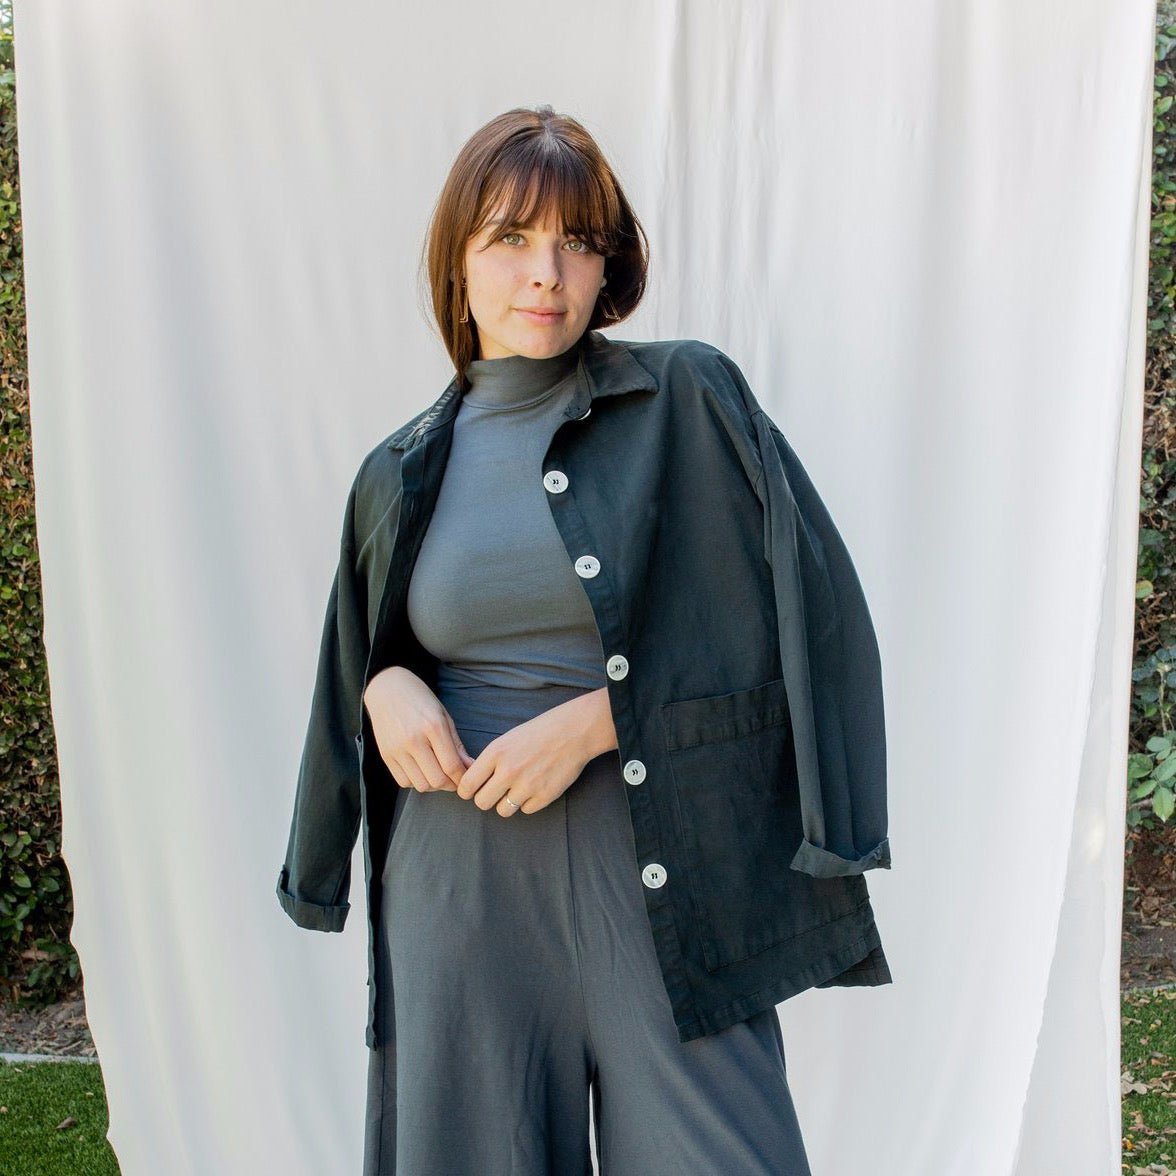 Chore jacket with off-white buttons and two oversized pockets in the color Black Forest. The Painter's Jacket is designed by Mien and made in Los Angeles, CA.